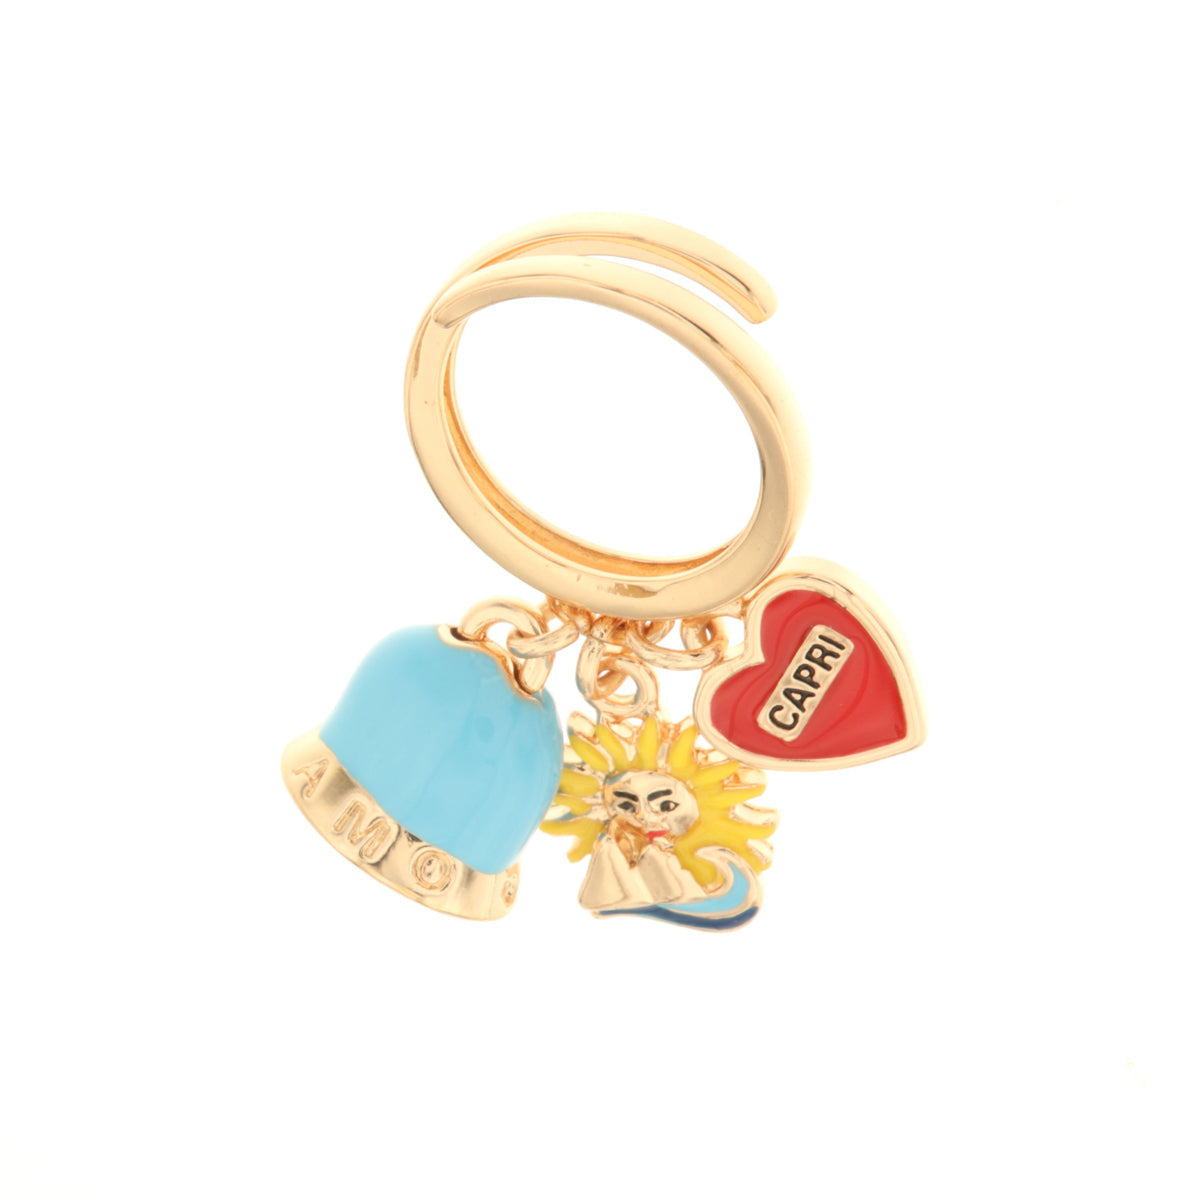 Metal ring with charming bell, sun, pharaglioni and heart with Capri